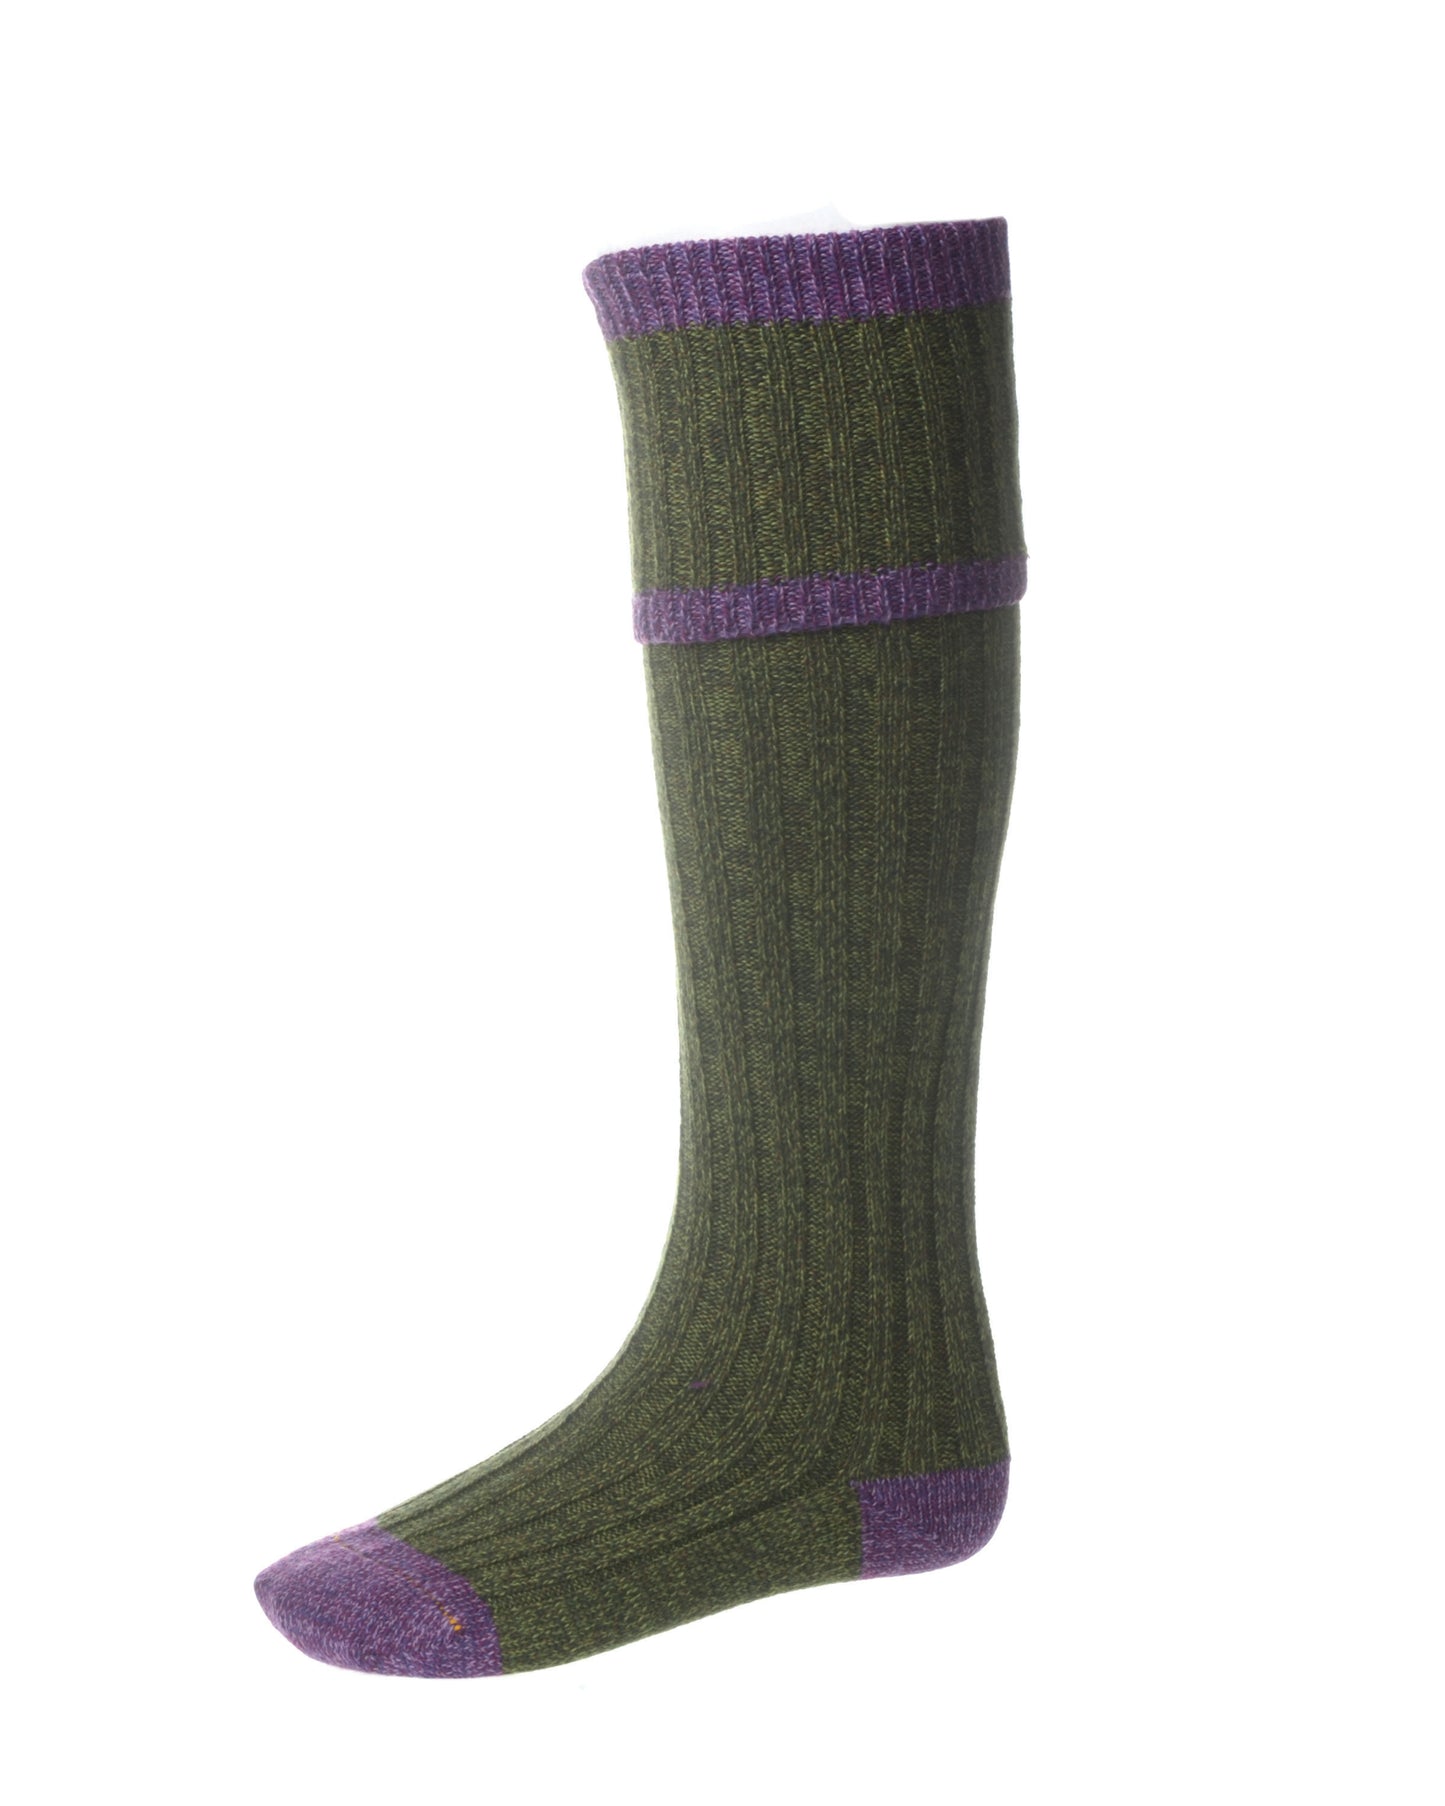 Knee High Golf Socks made from Merino Wool with removable Garter Ties Media